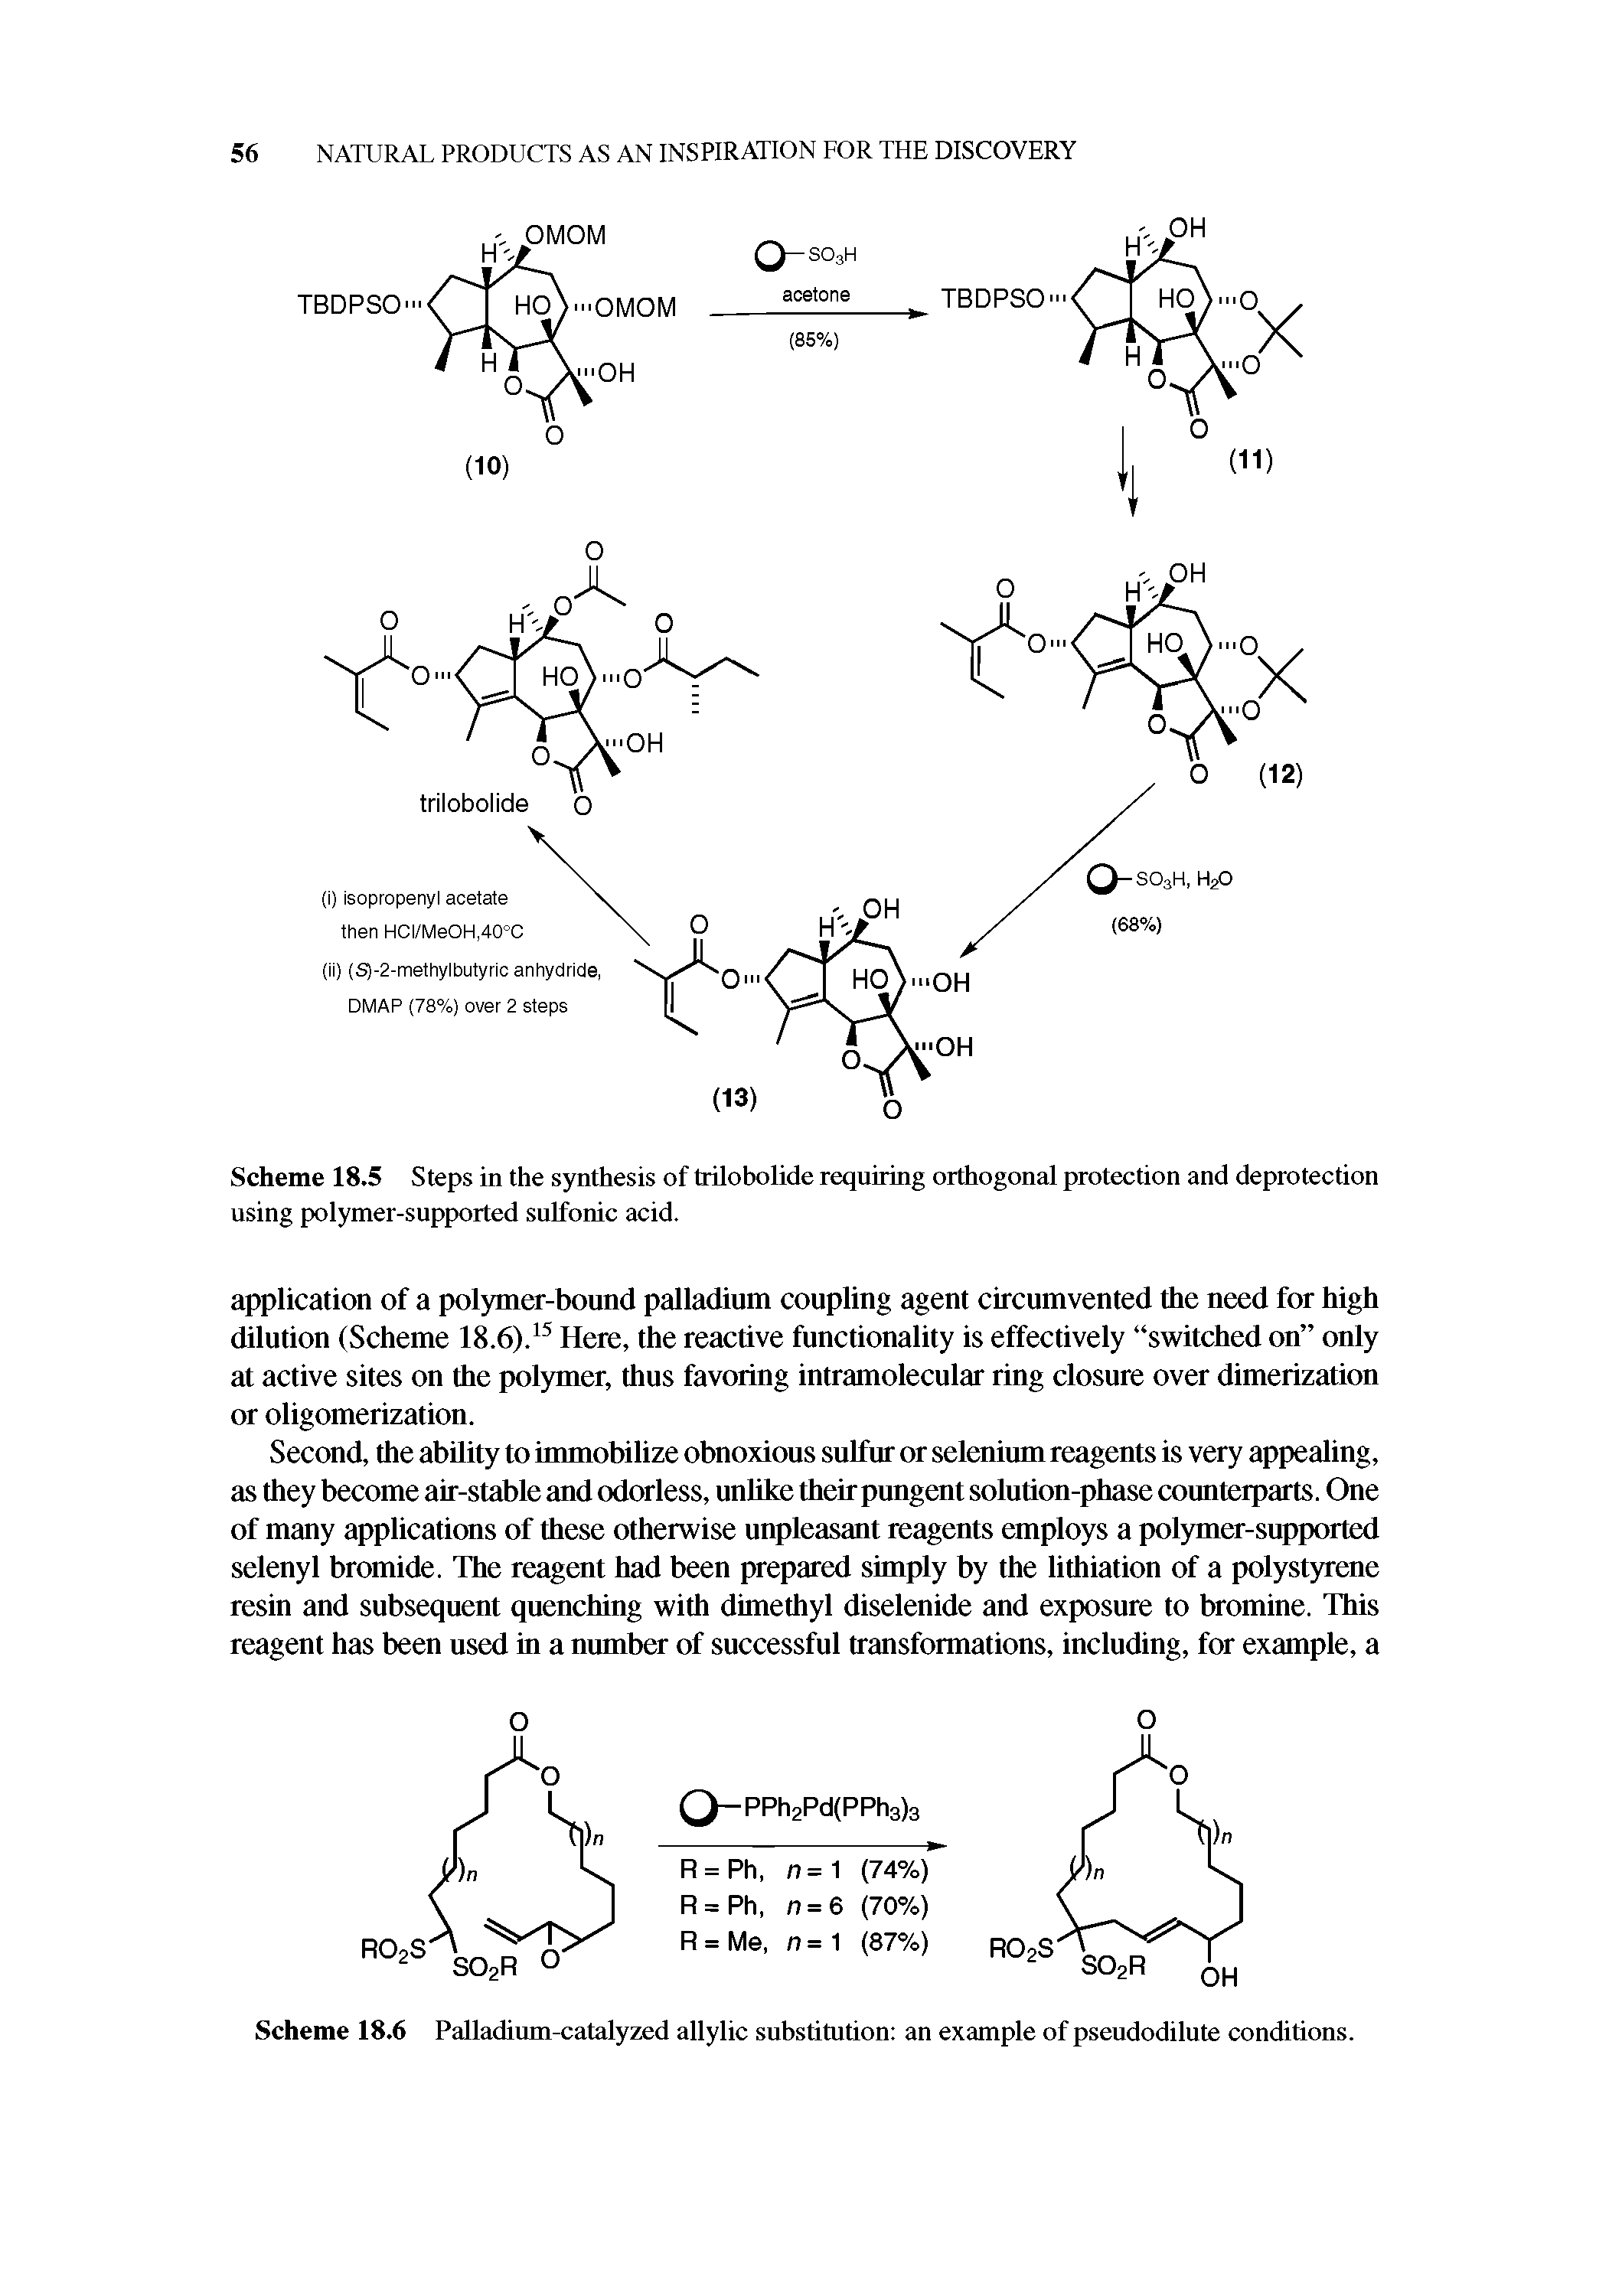 Scheme 18.5 Steps in the synthesis of trilobolide requiring orthogonal protection and deprotection using polymer-supported sulfonic acid.